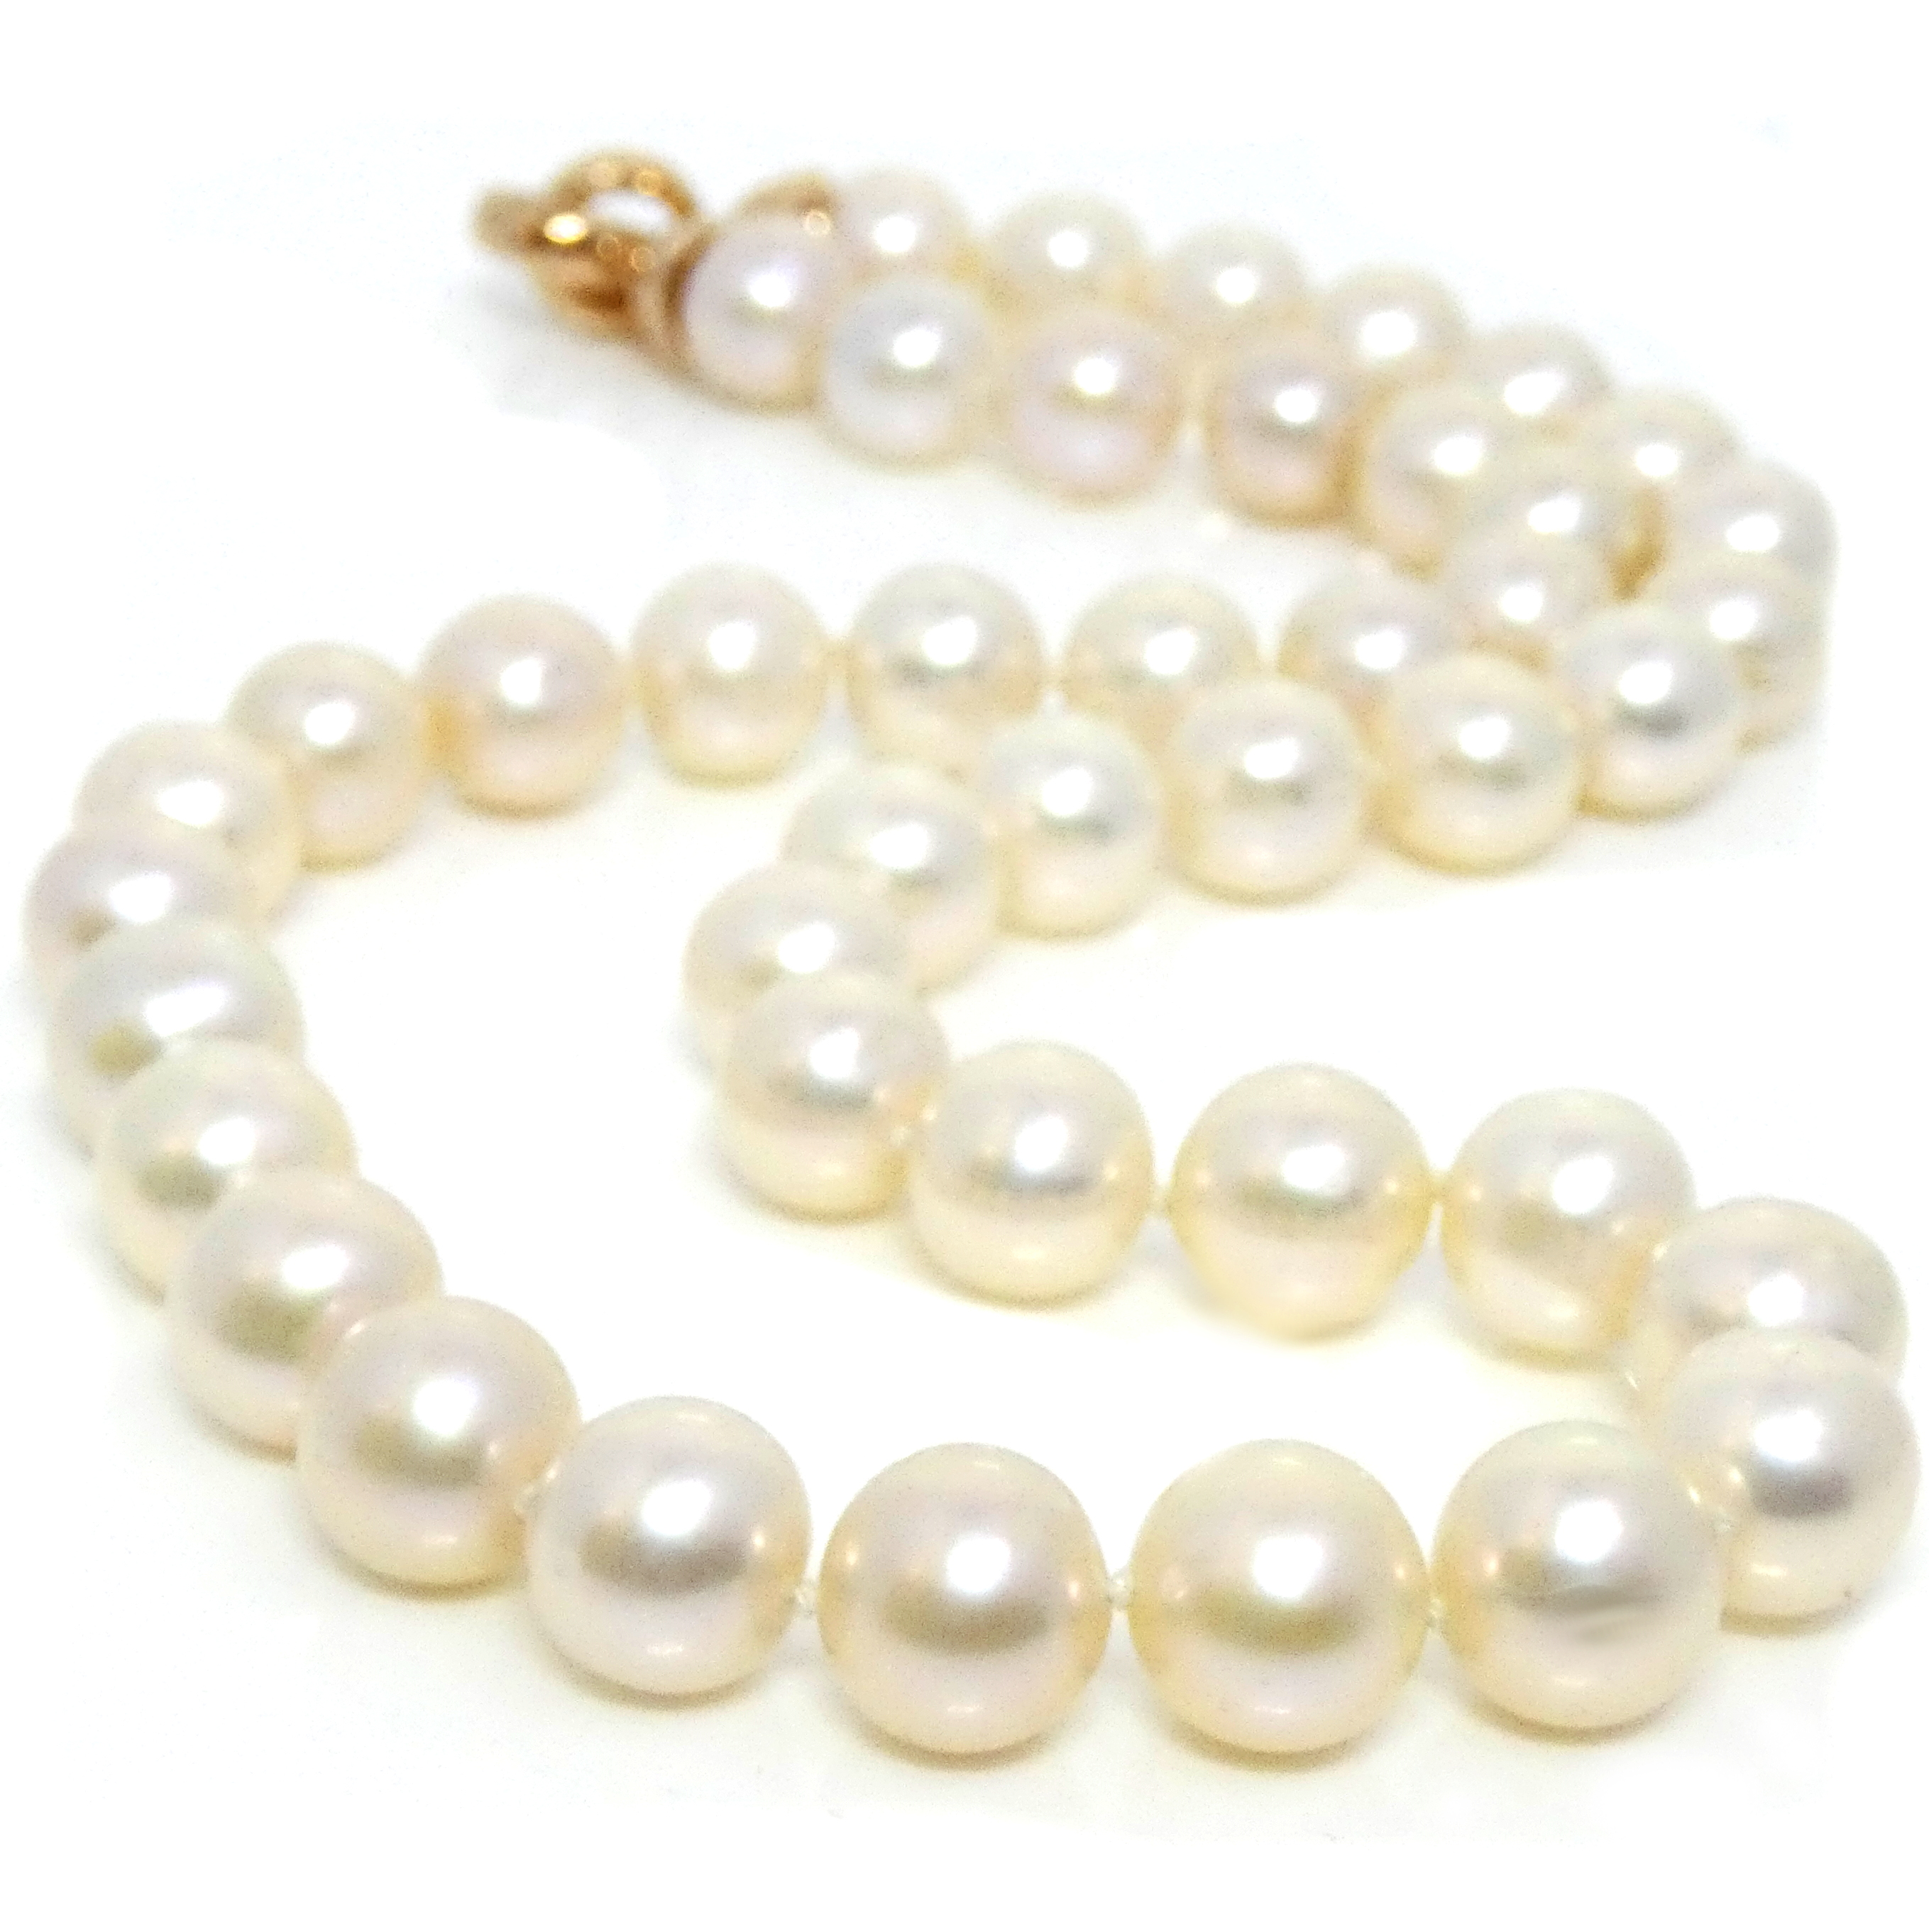 Gold and Peach Pearl Necklaces, Pearlescence